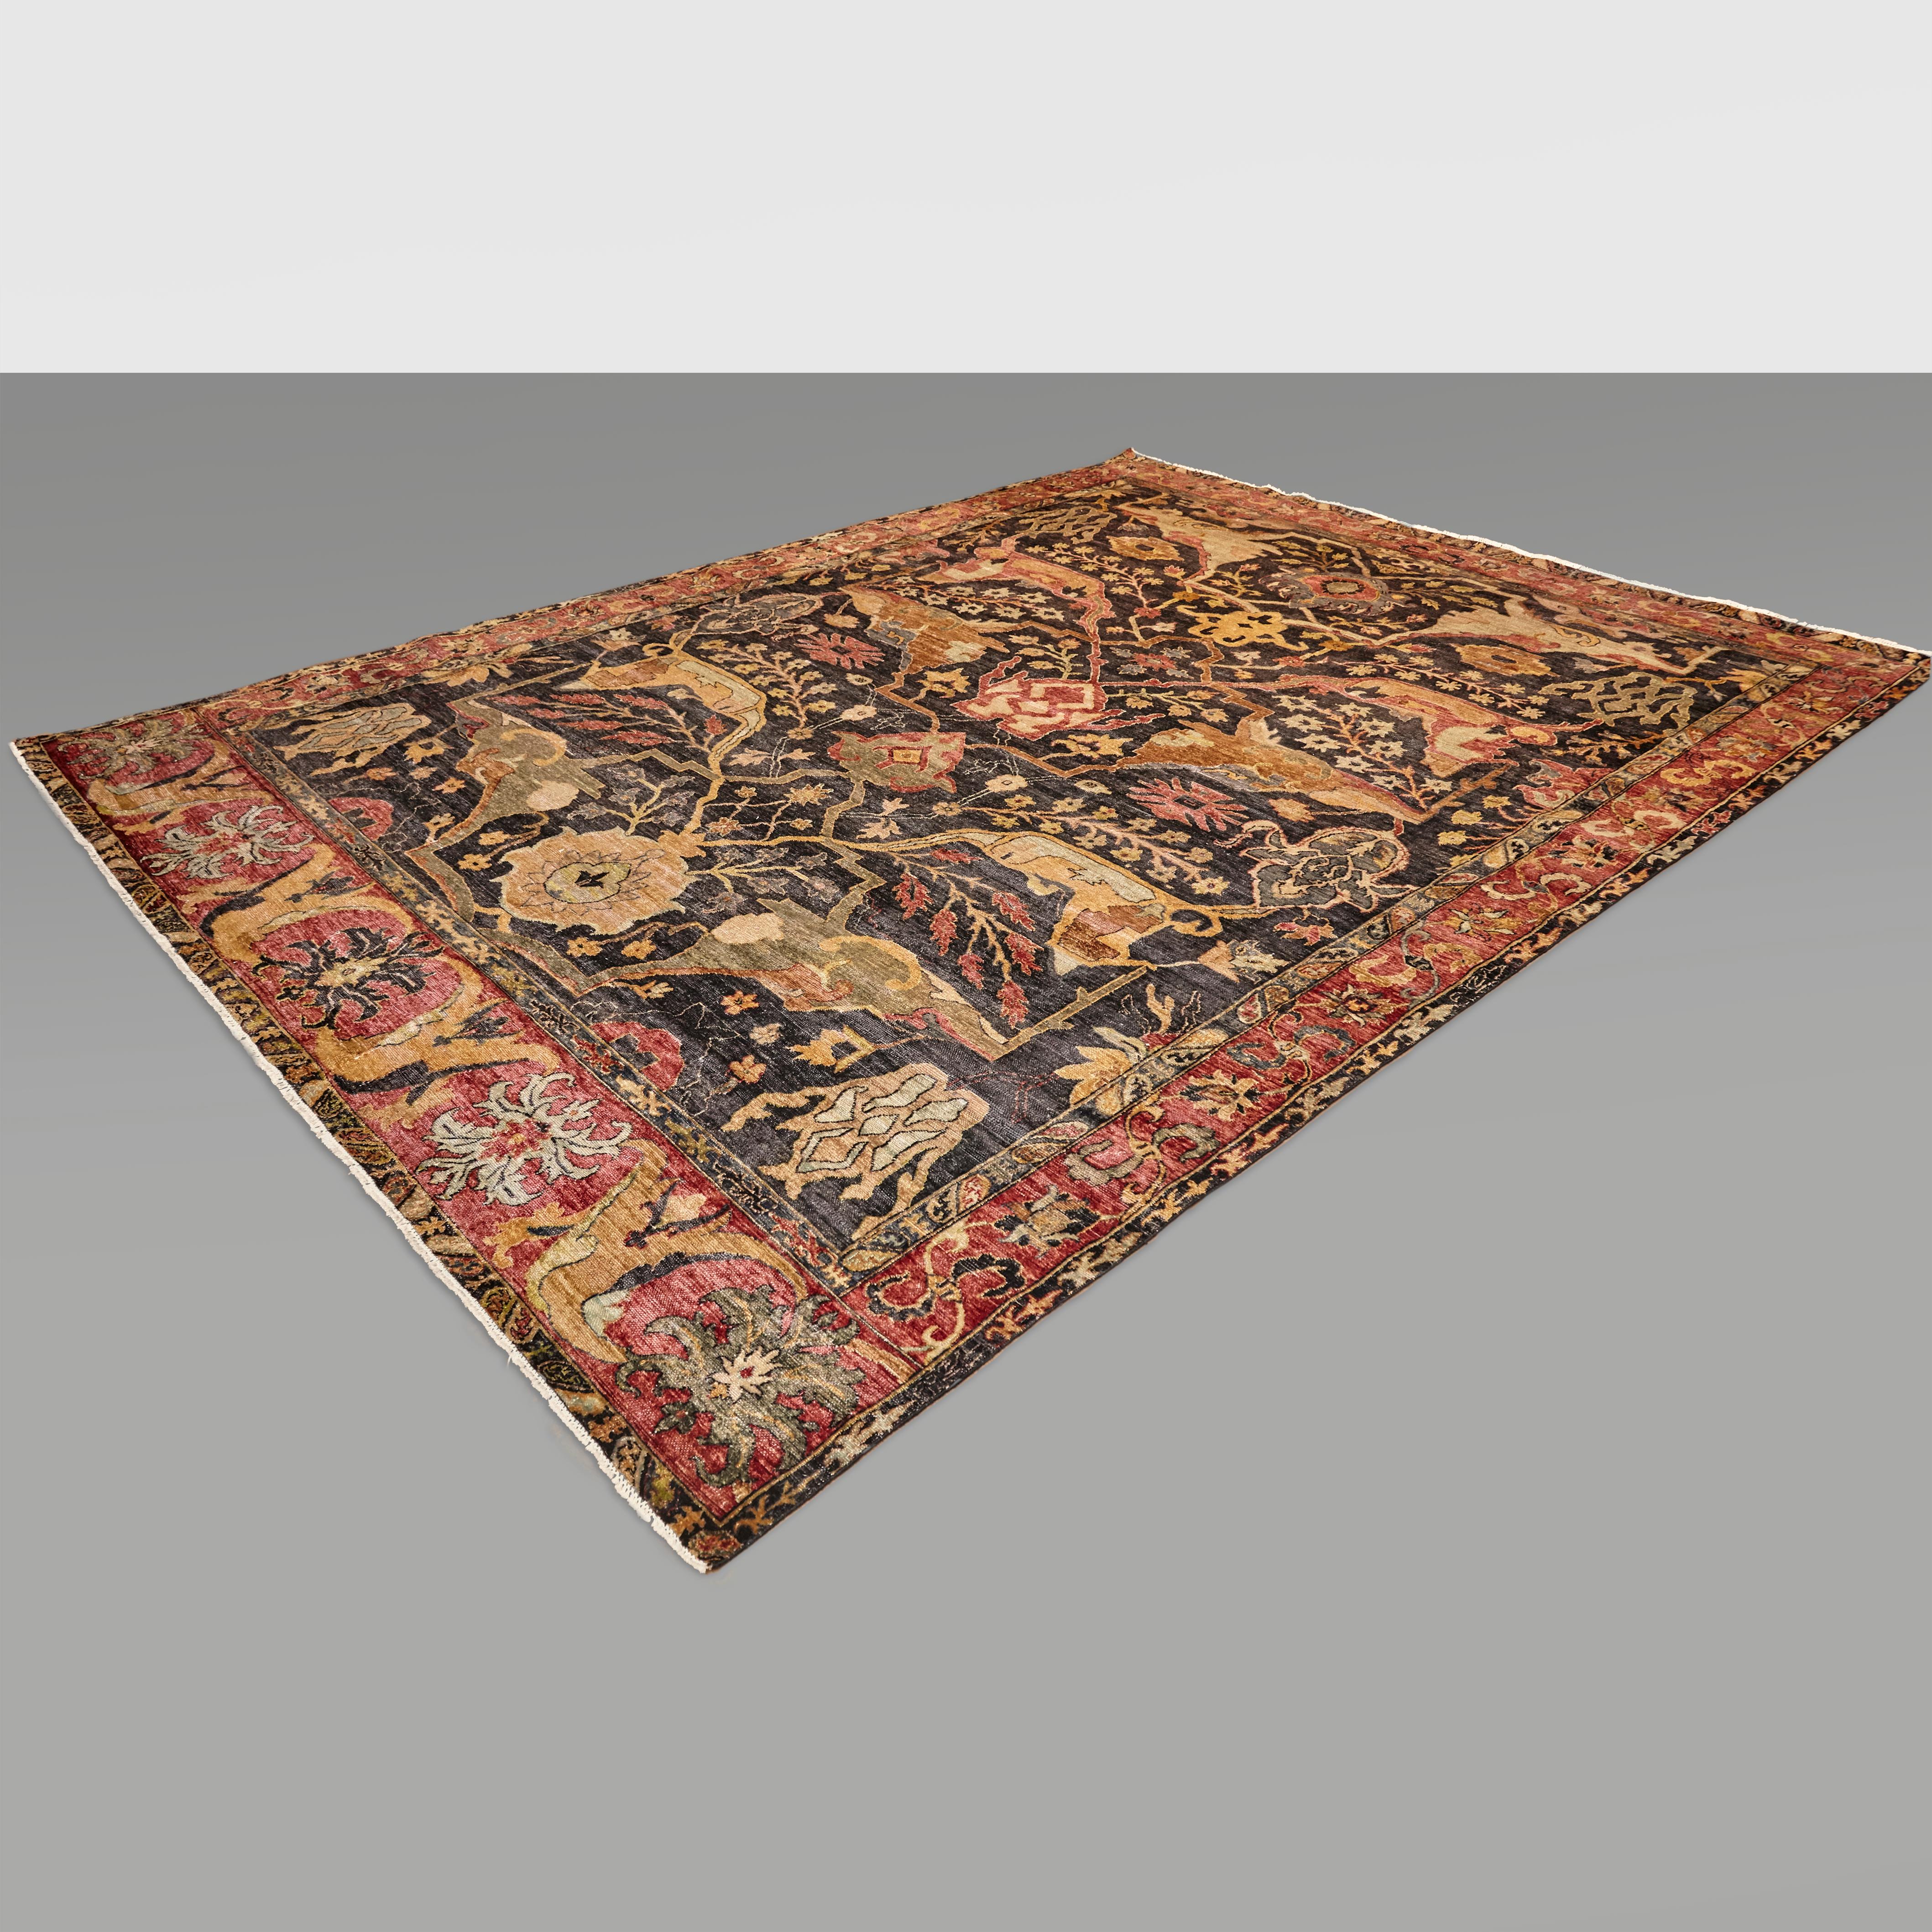 In the Style of Bidjar Old Indian Hand-Knotted Wool Large Rug   13